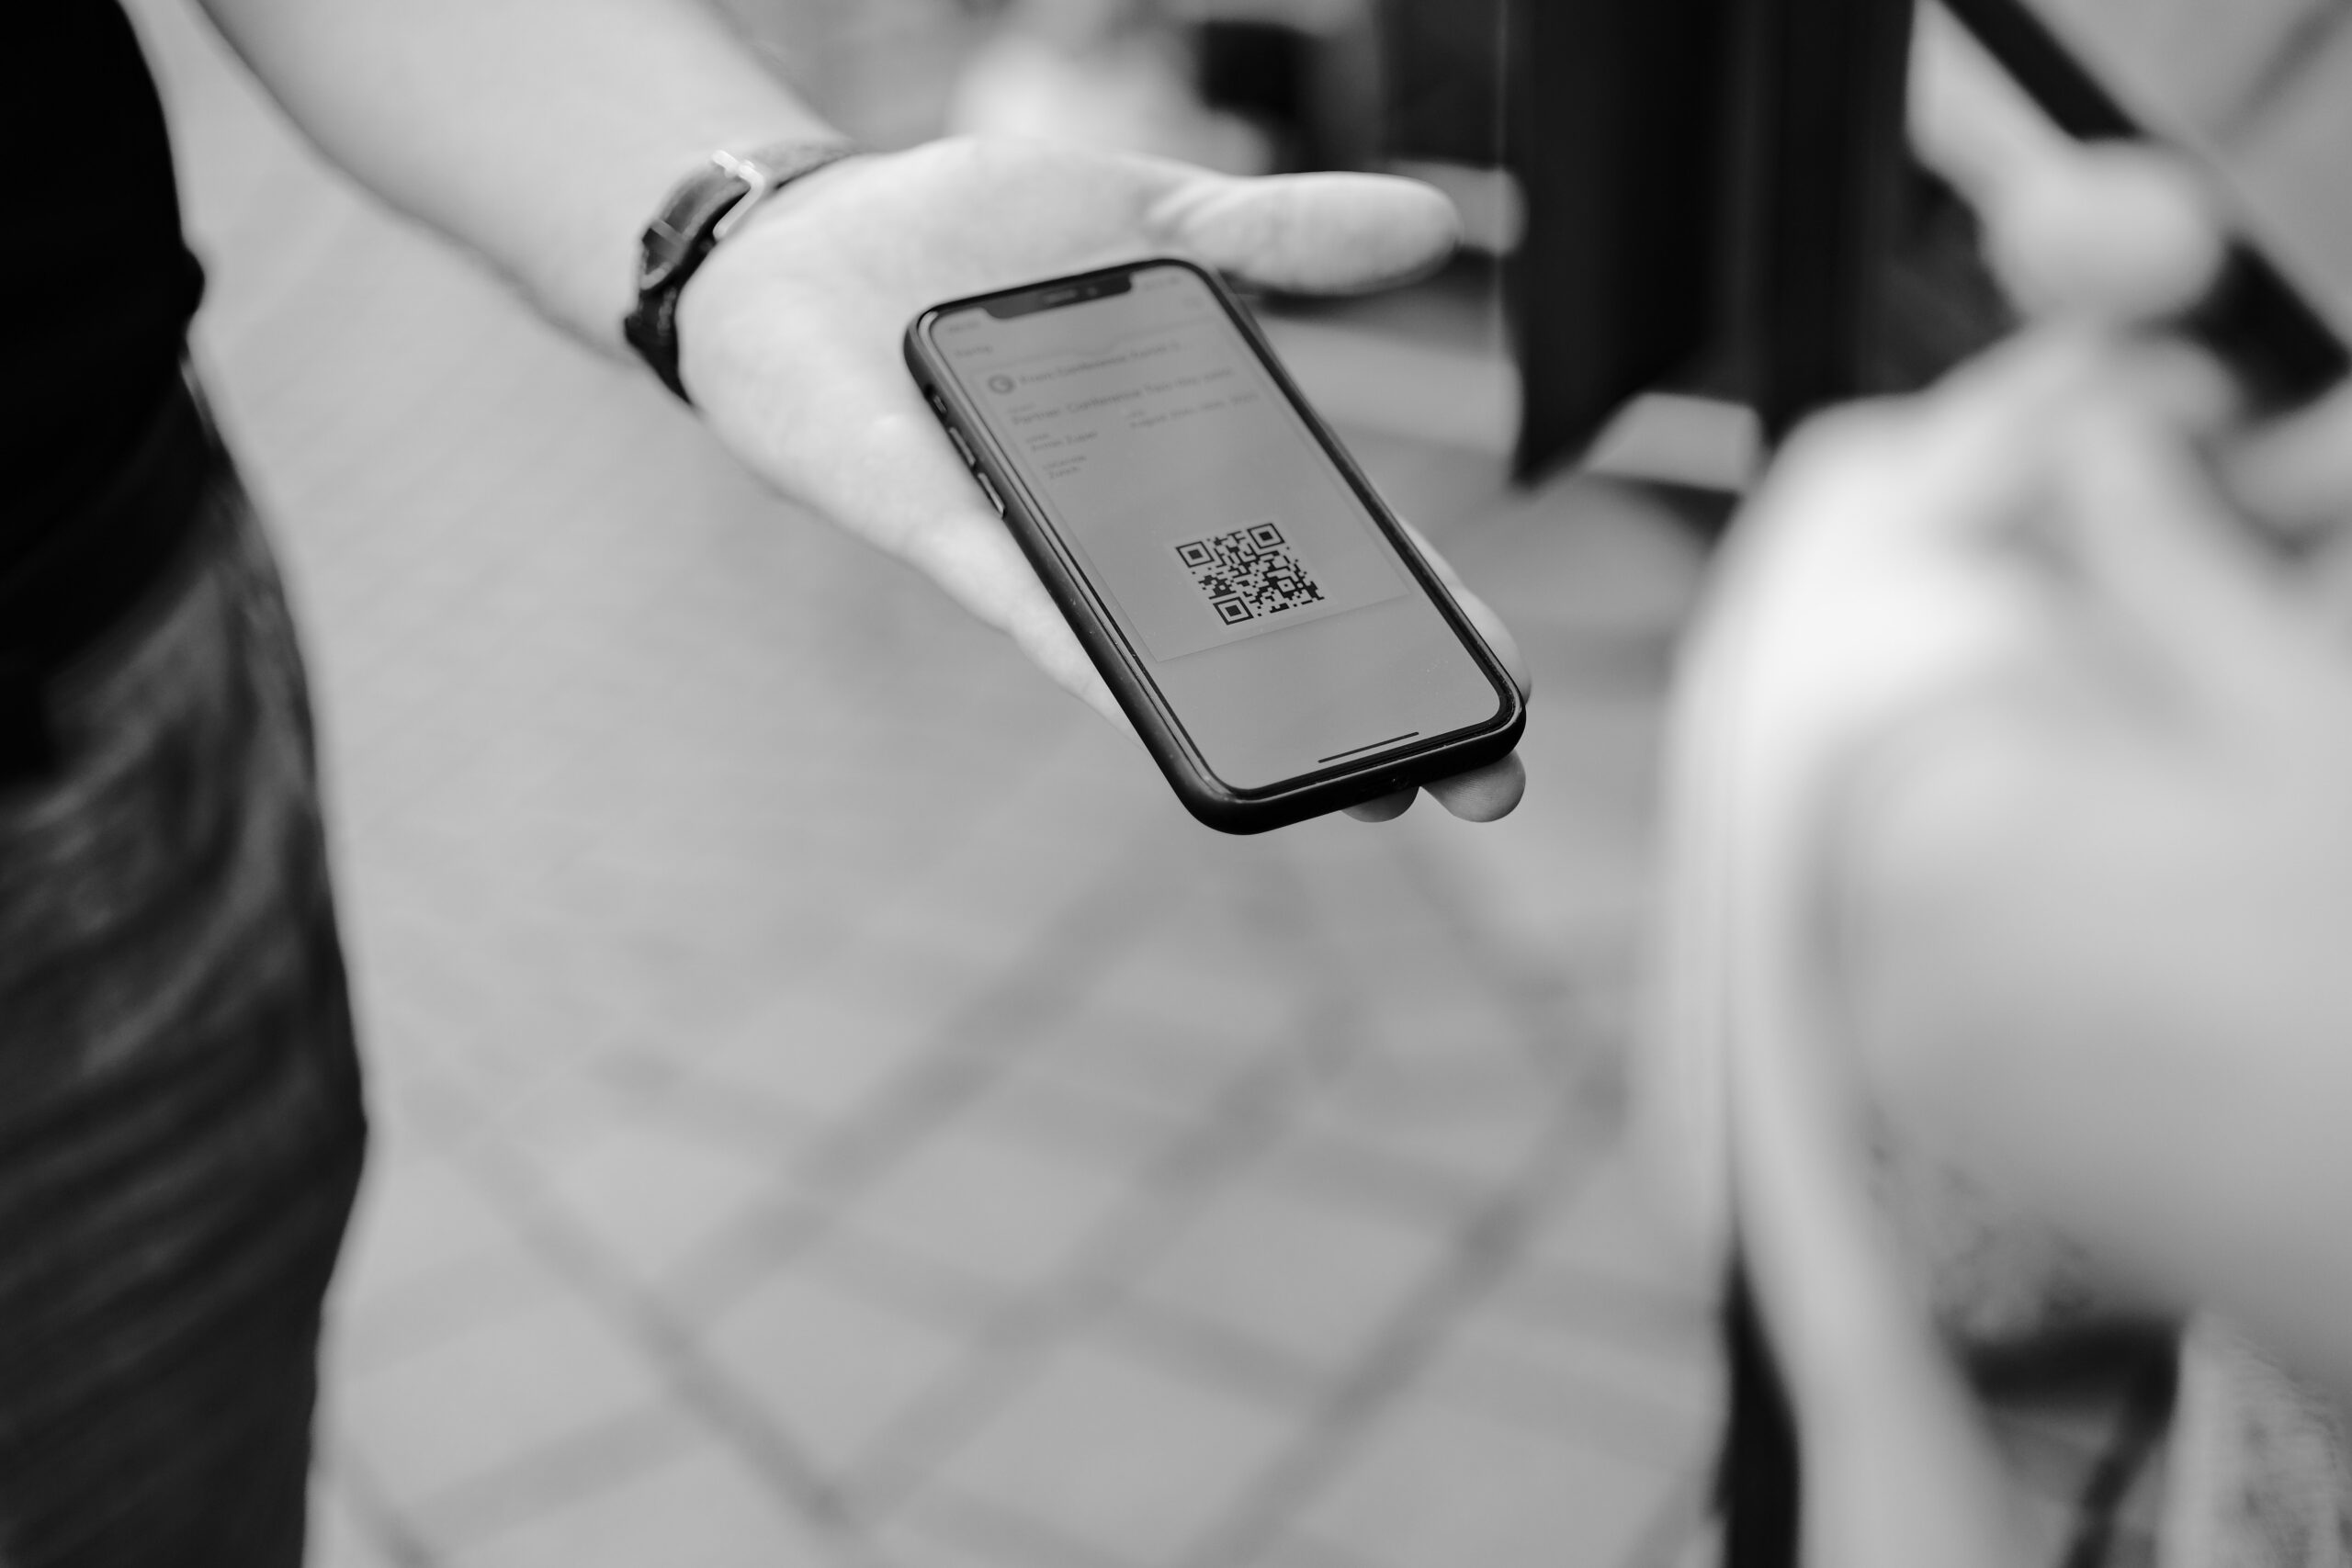 A person's hand holding a cell phone. The phone has a QR code displayed on the phone's screen.